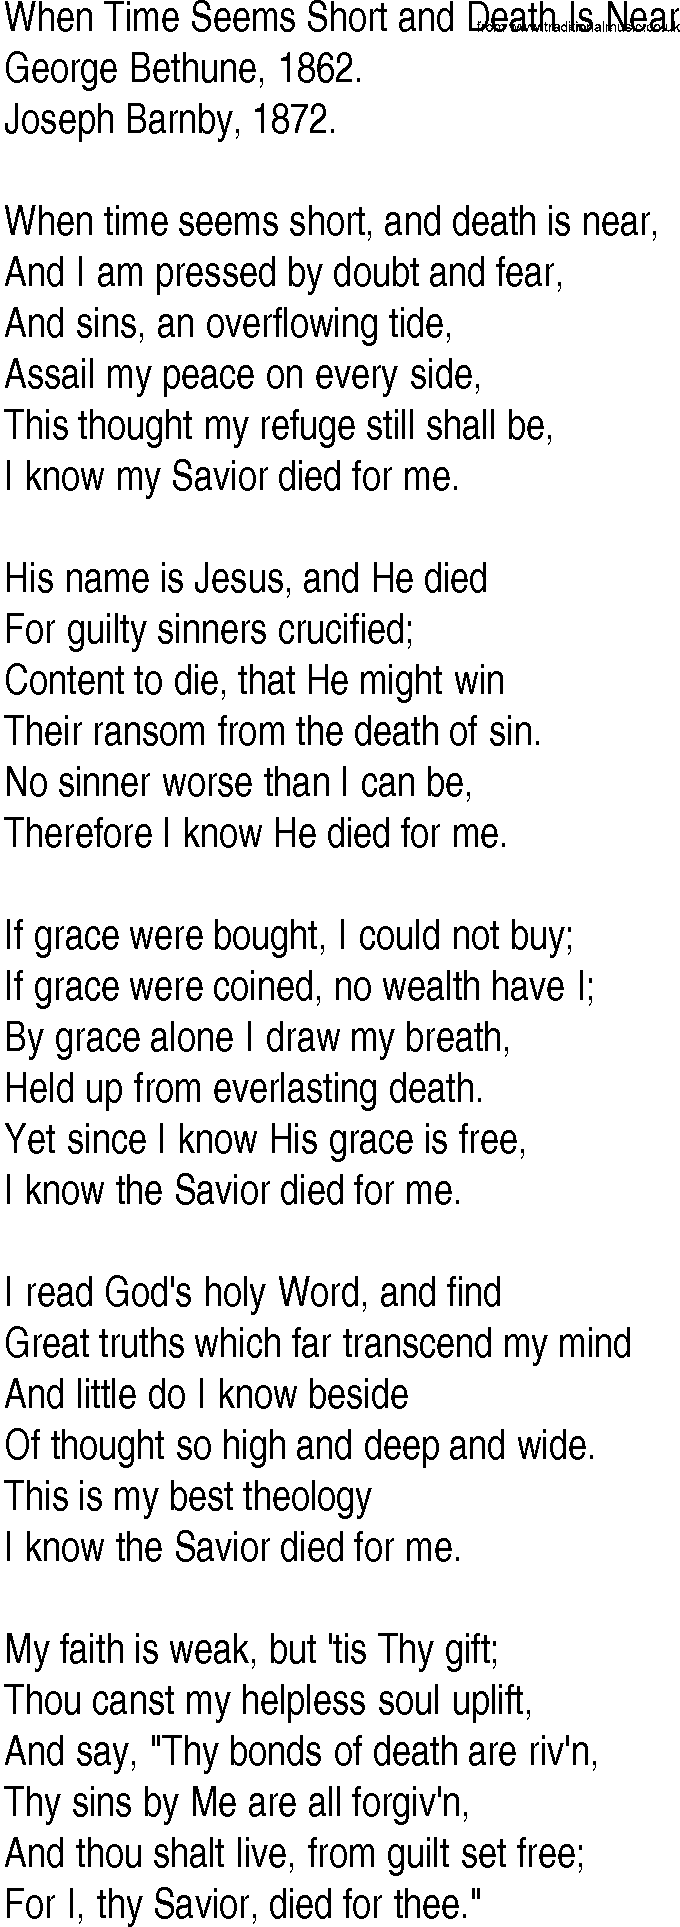 Hymn and Gospel Song: When Time Seems Short and Death Is Near by George Bethune lyrics